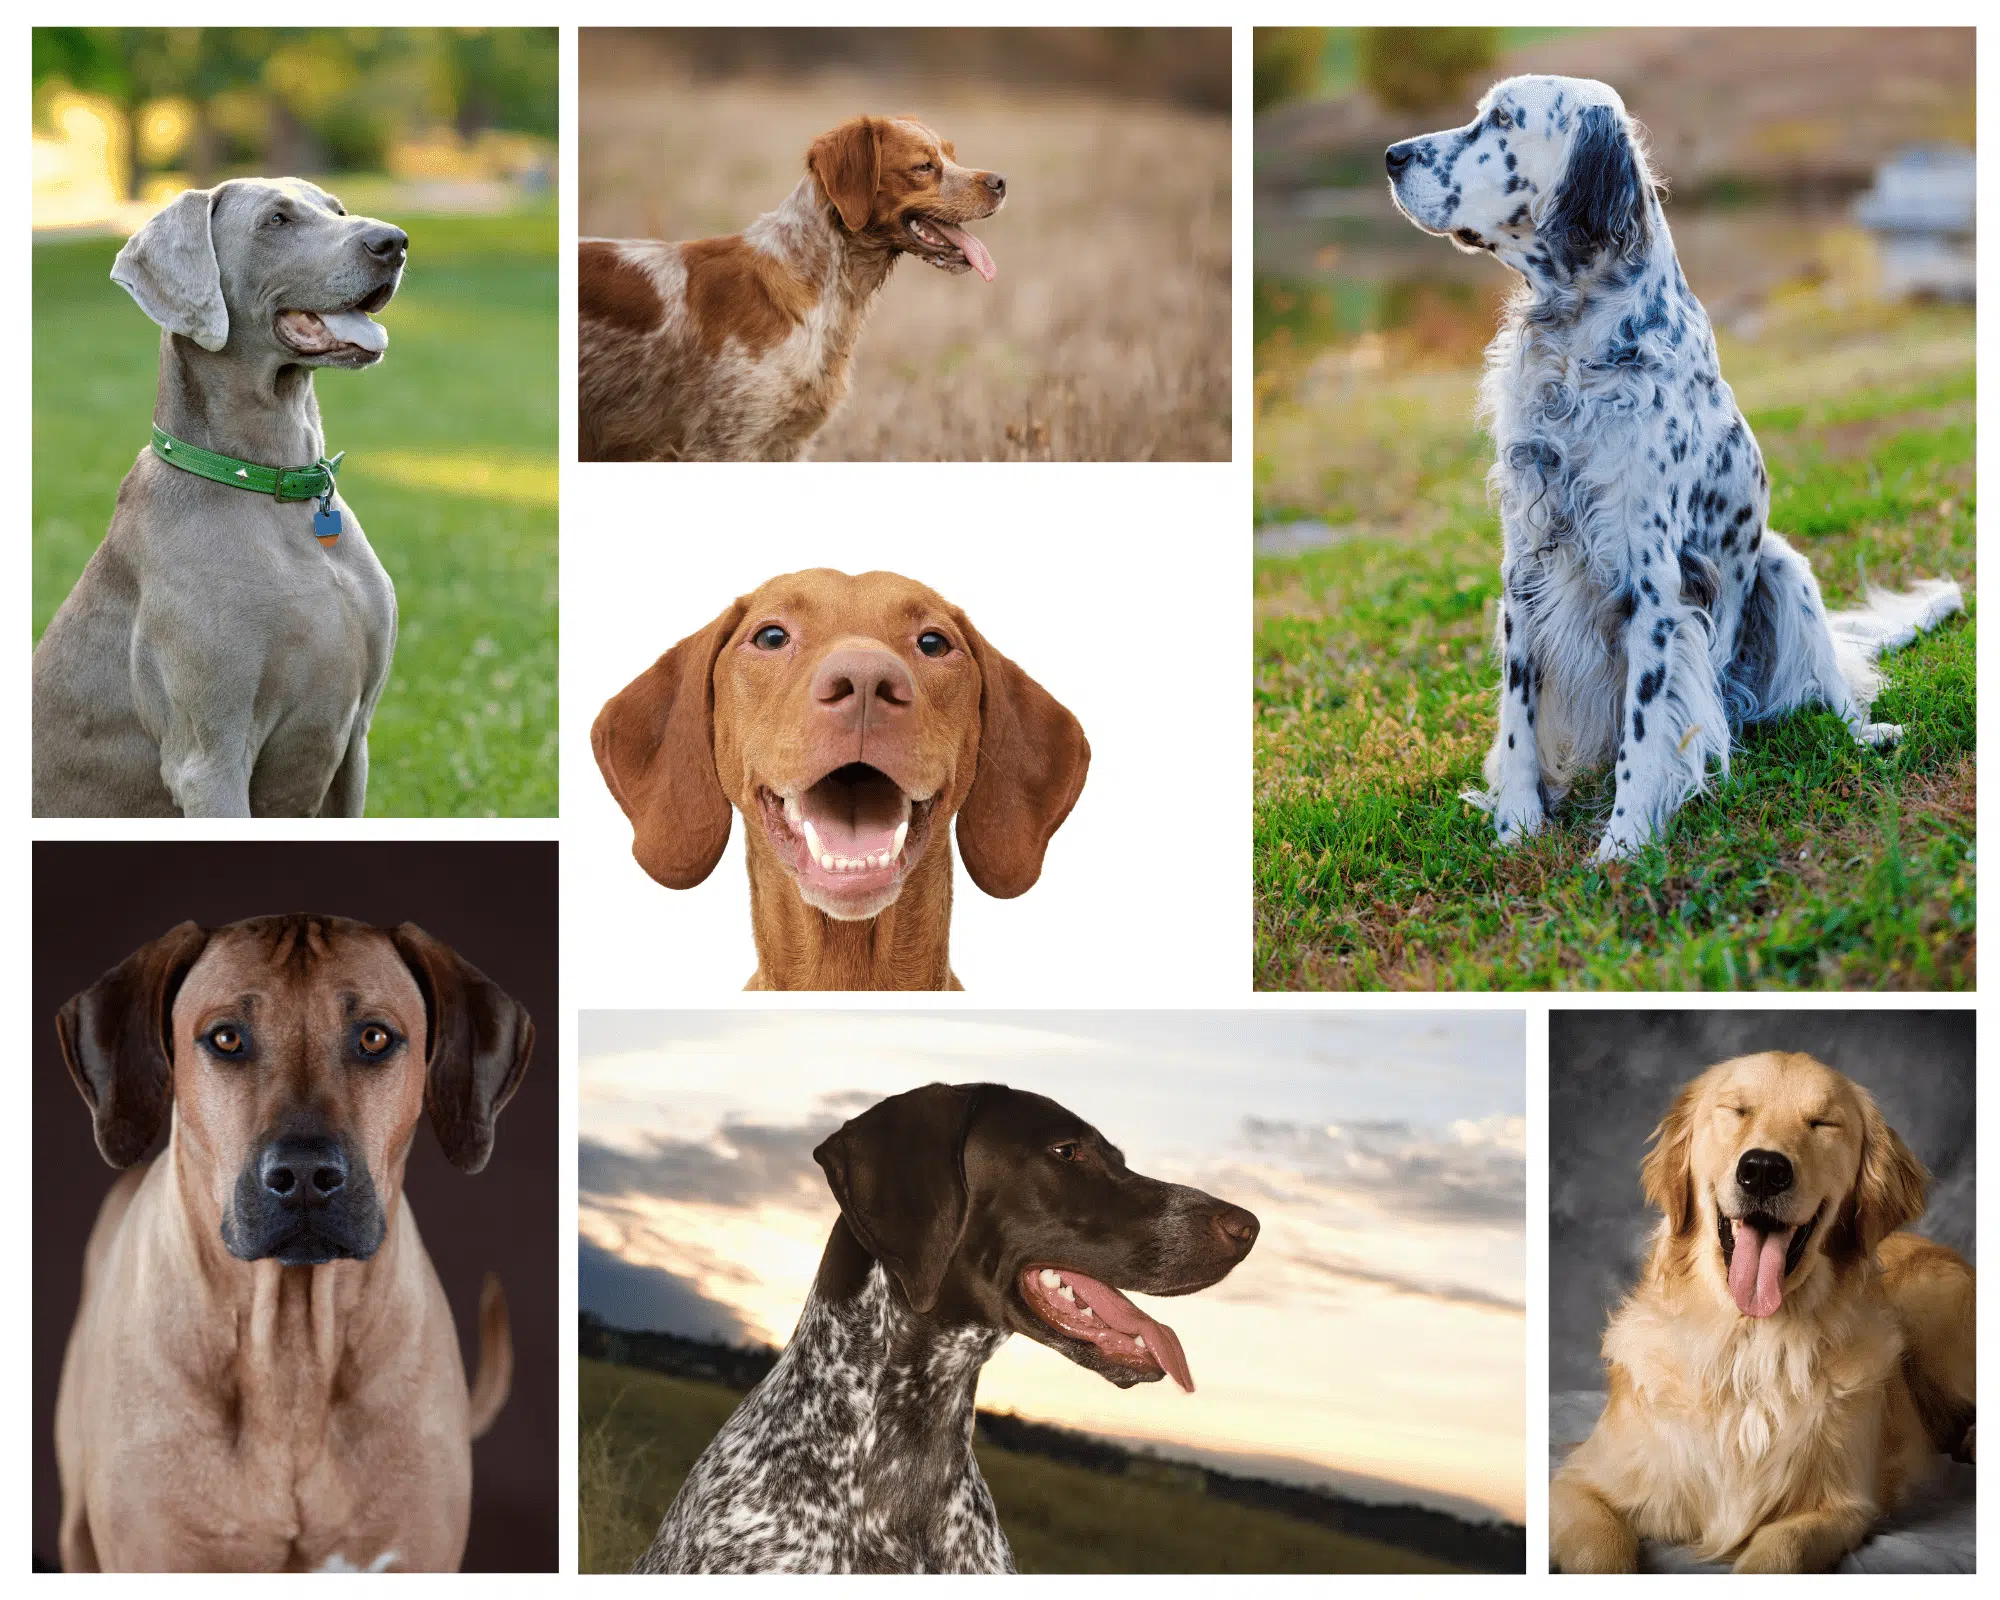 A collage of multiple dogs including the English Setter, Rhodesian Ridgeback, and Golden Retriever